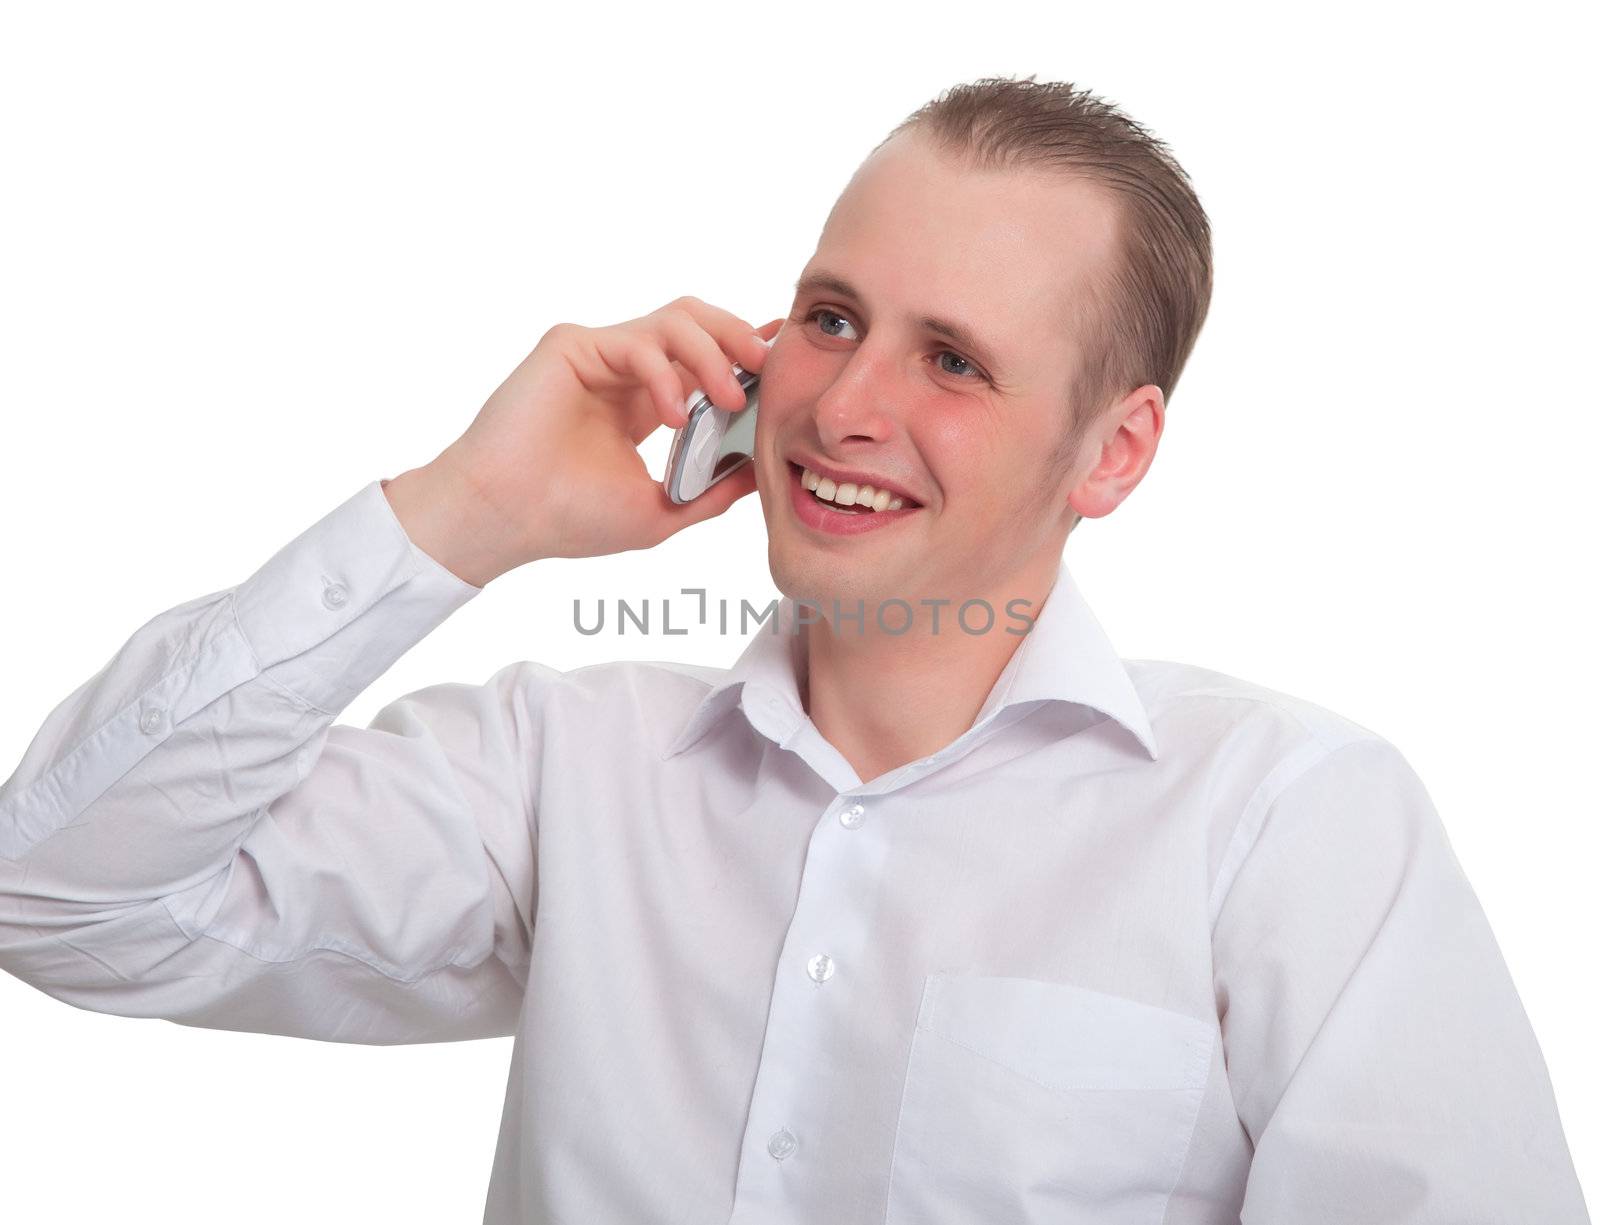 The young man says with a smile on your mobile phone. Isolated on white background